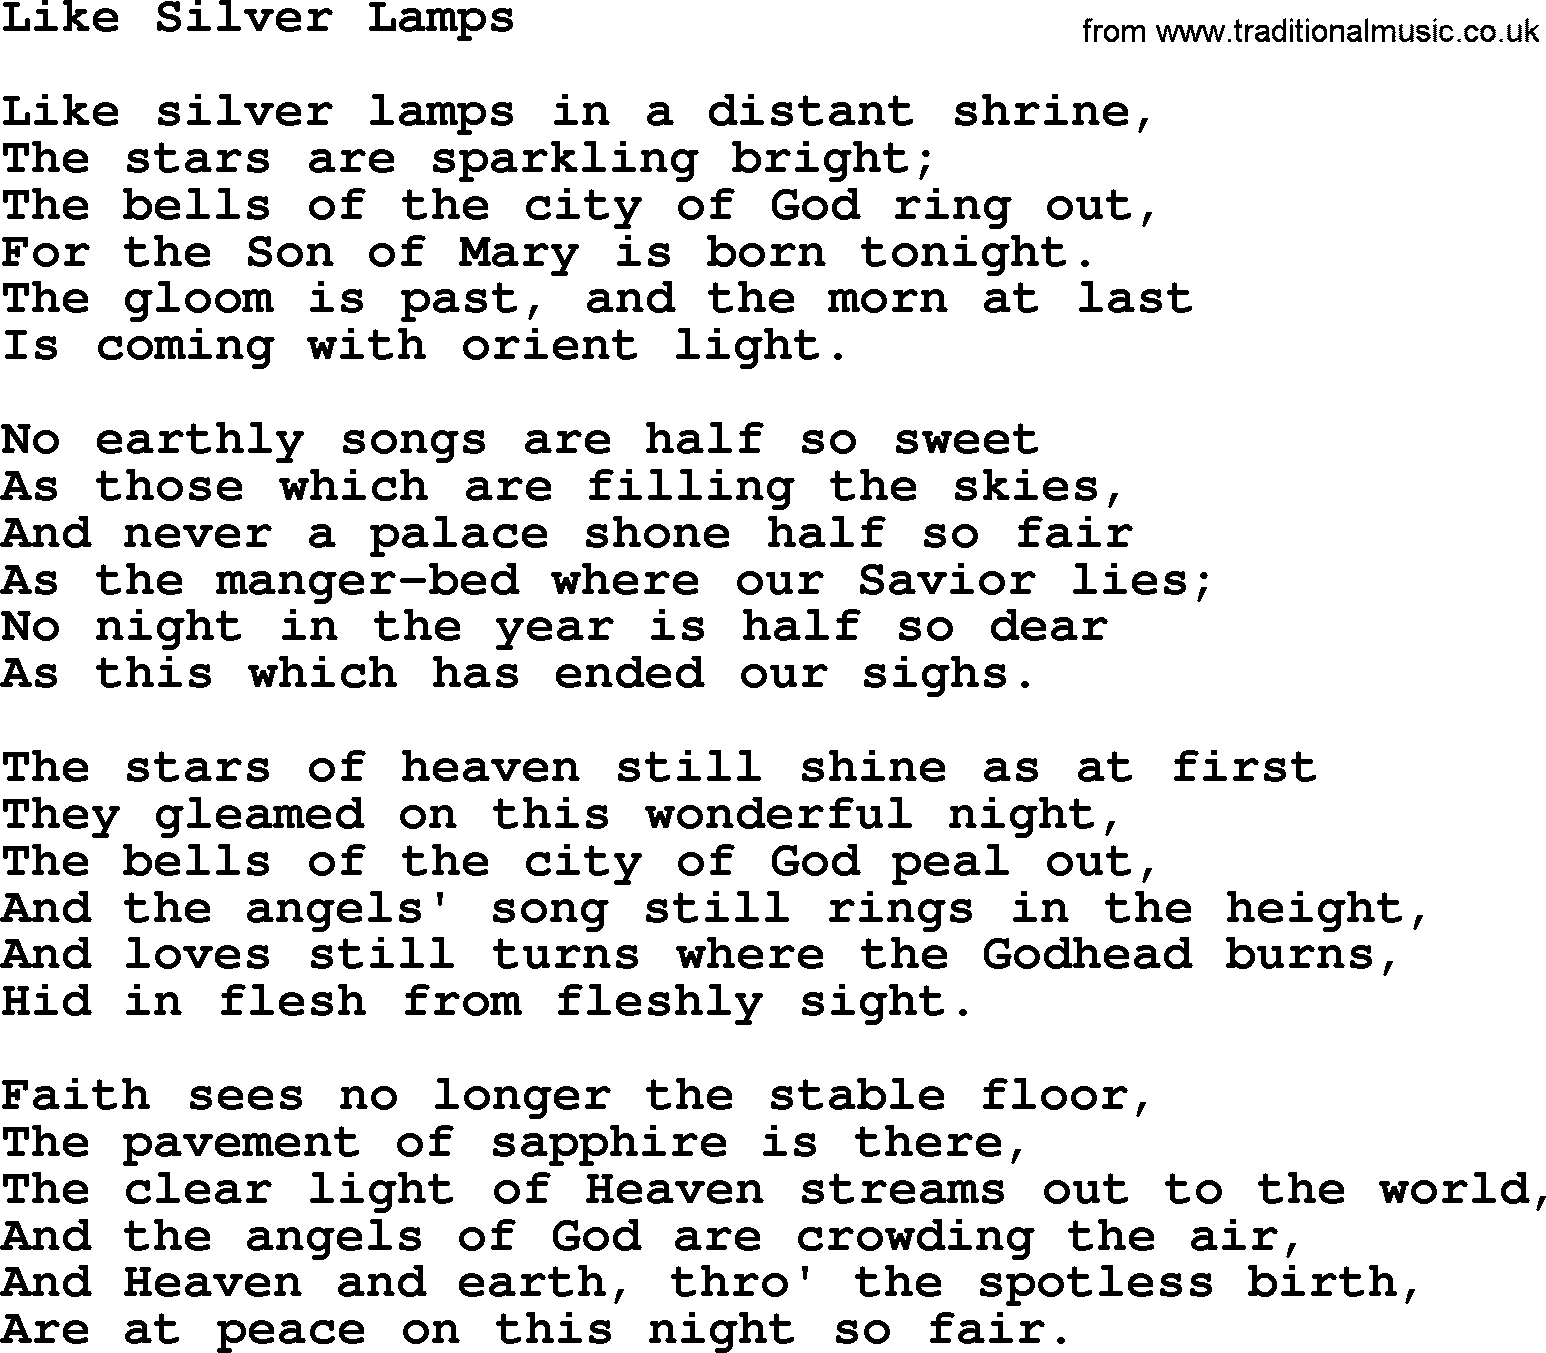 Christmas Hymns, Carols and Songs, title: Like Silver Lamps, lyrics with PDF